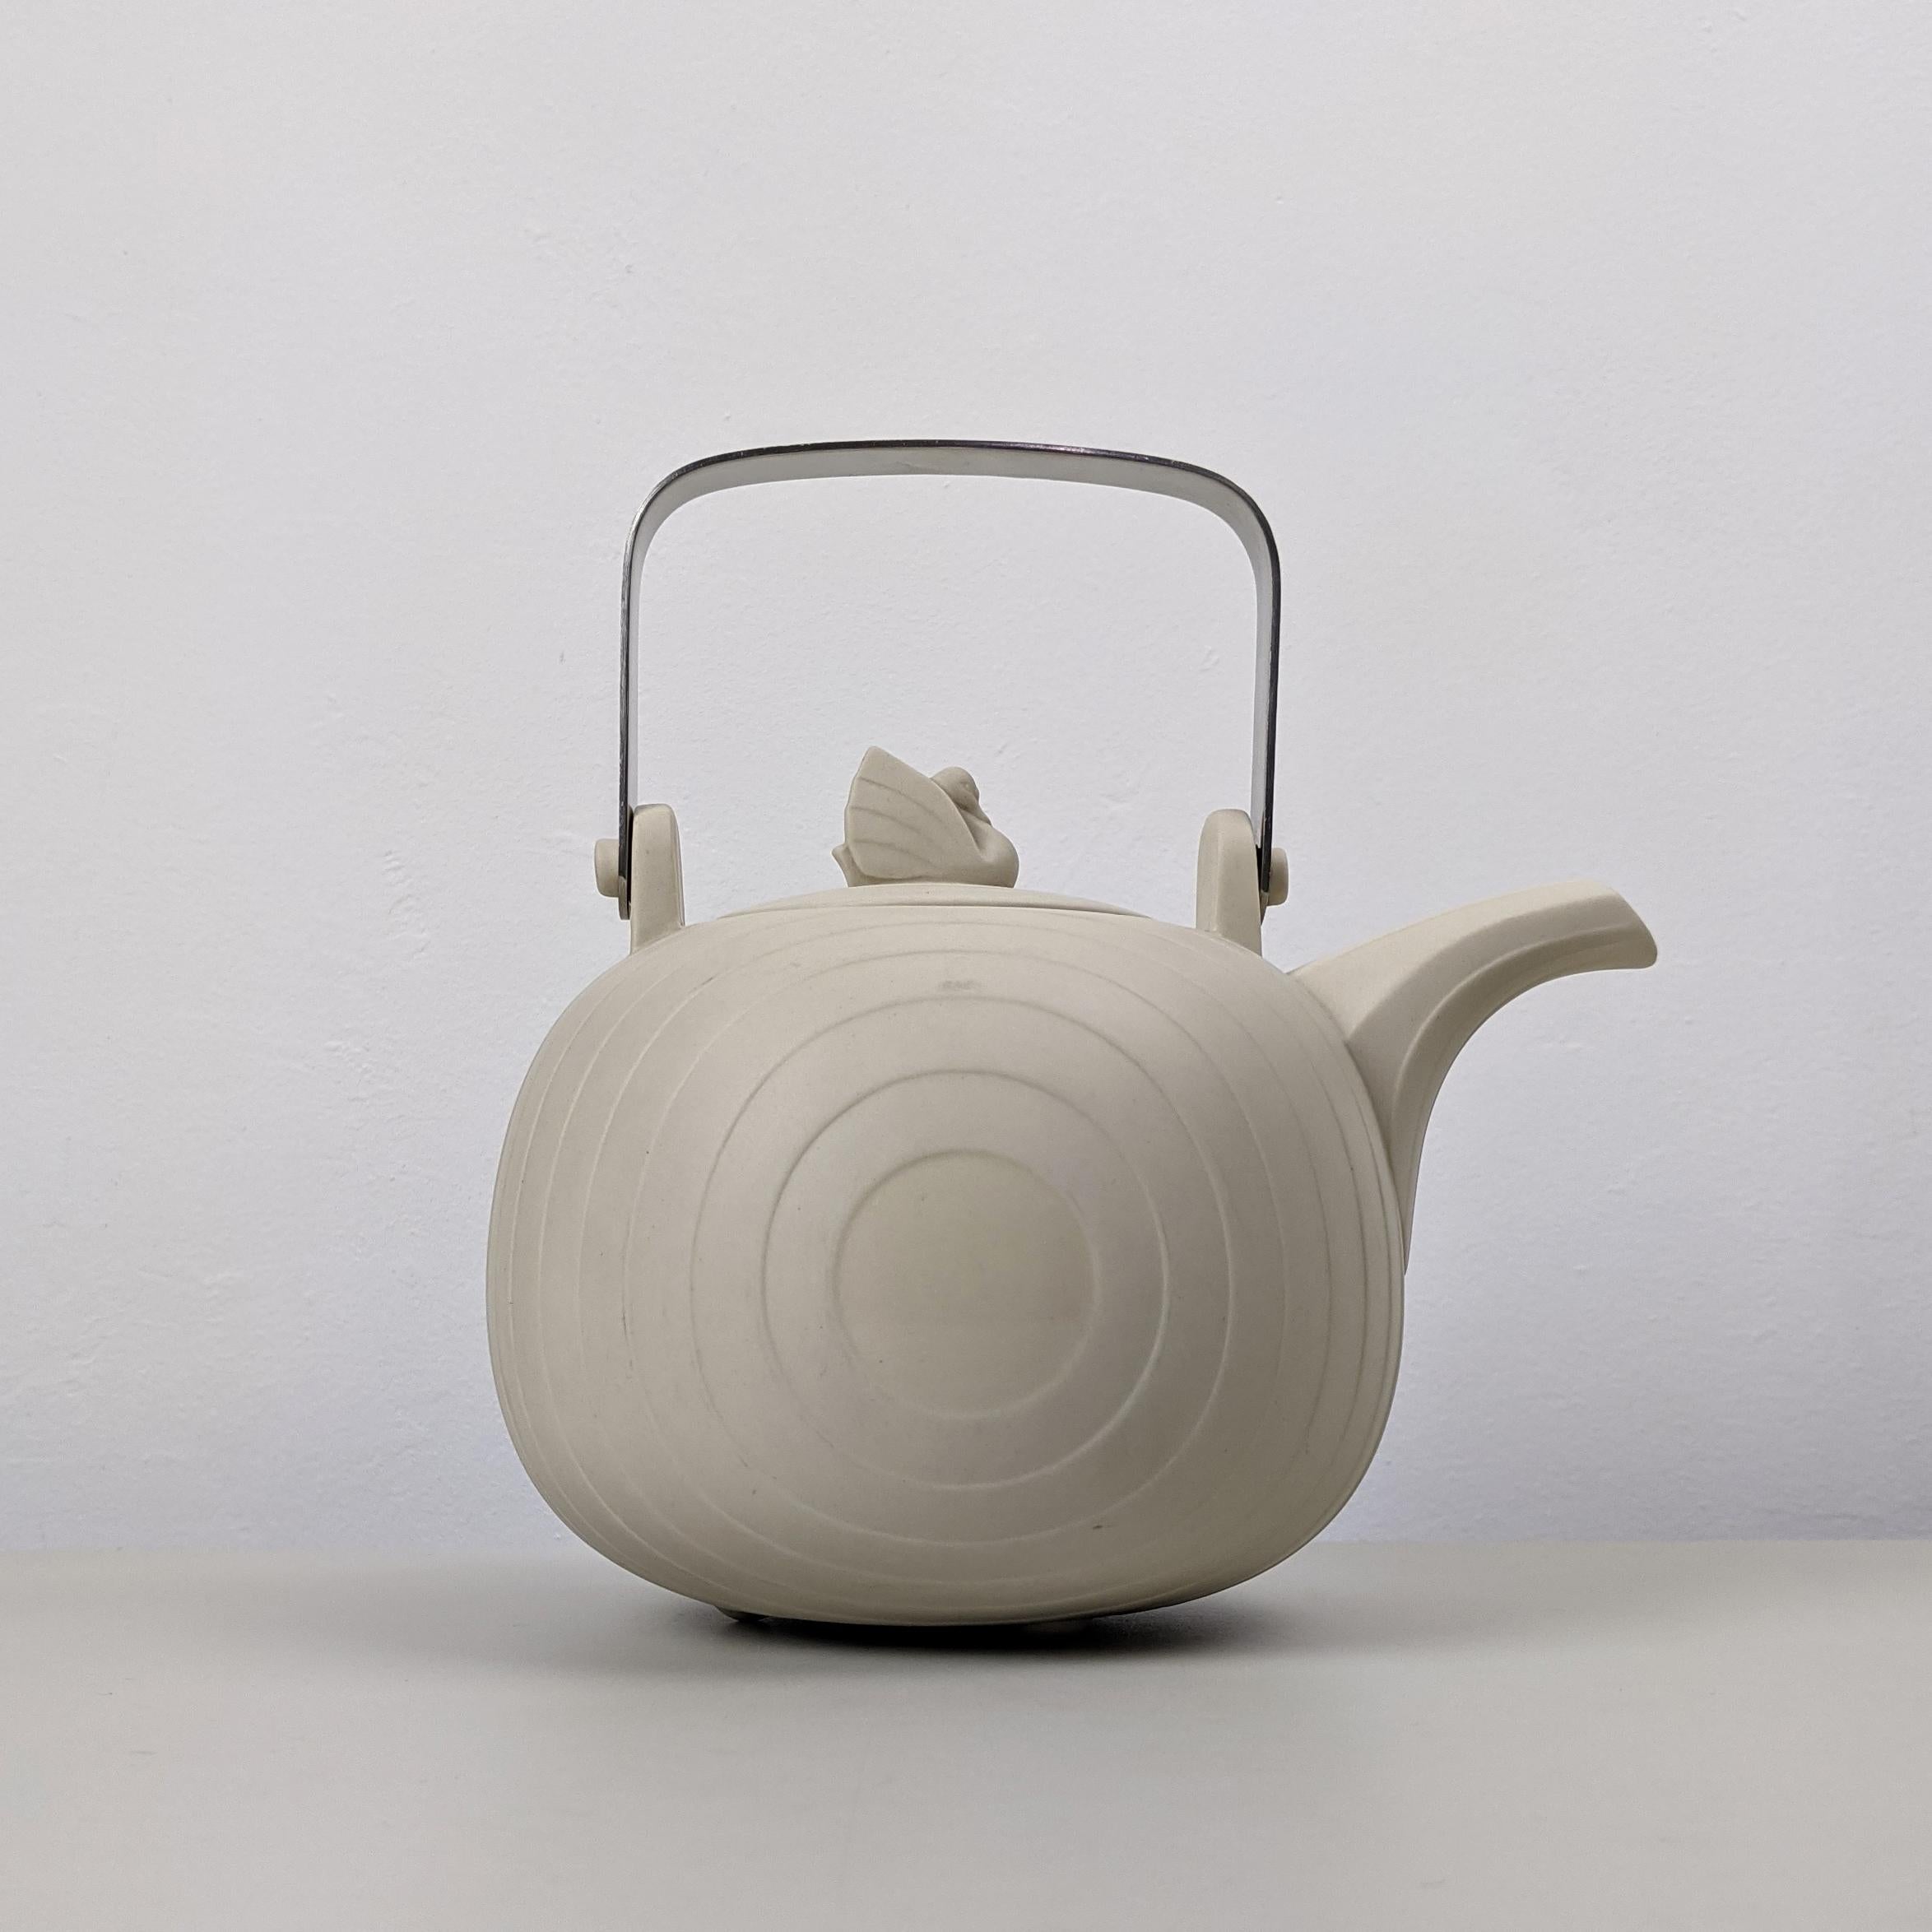 Late 20th Century Hornsea Teapot from the ‘Concept’ Series, Designed 1977 by Martin Hunt